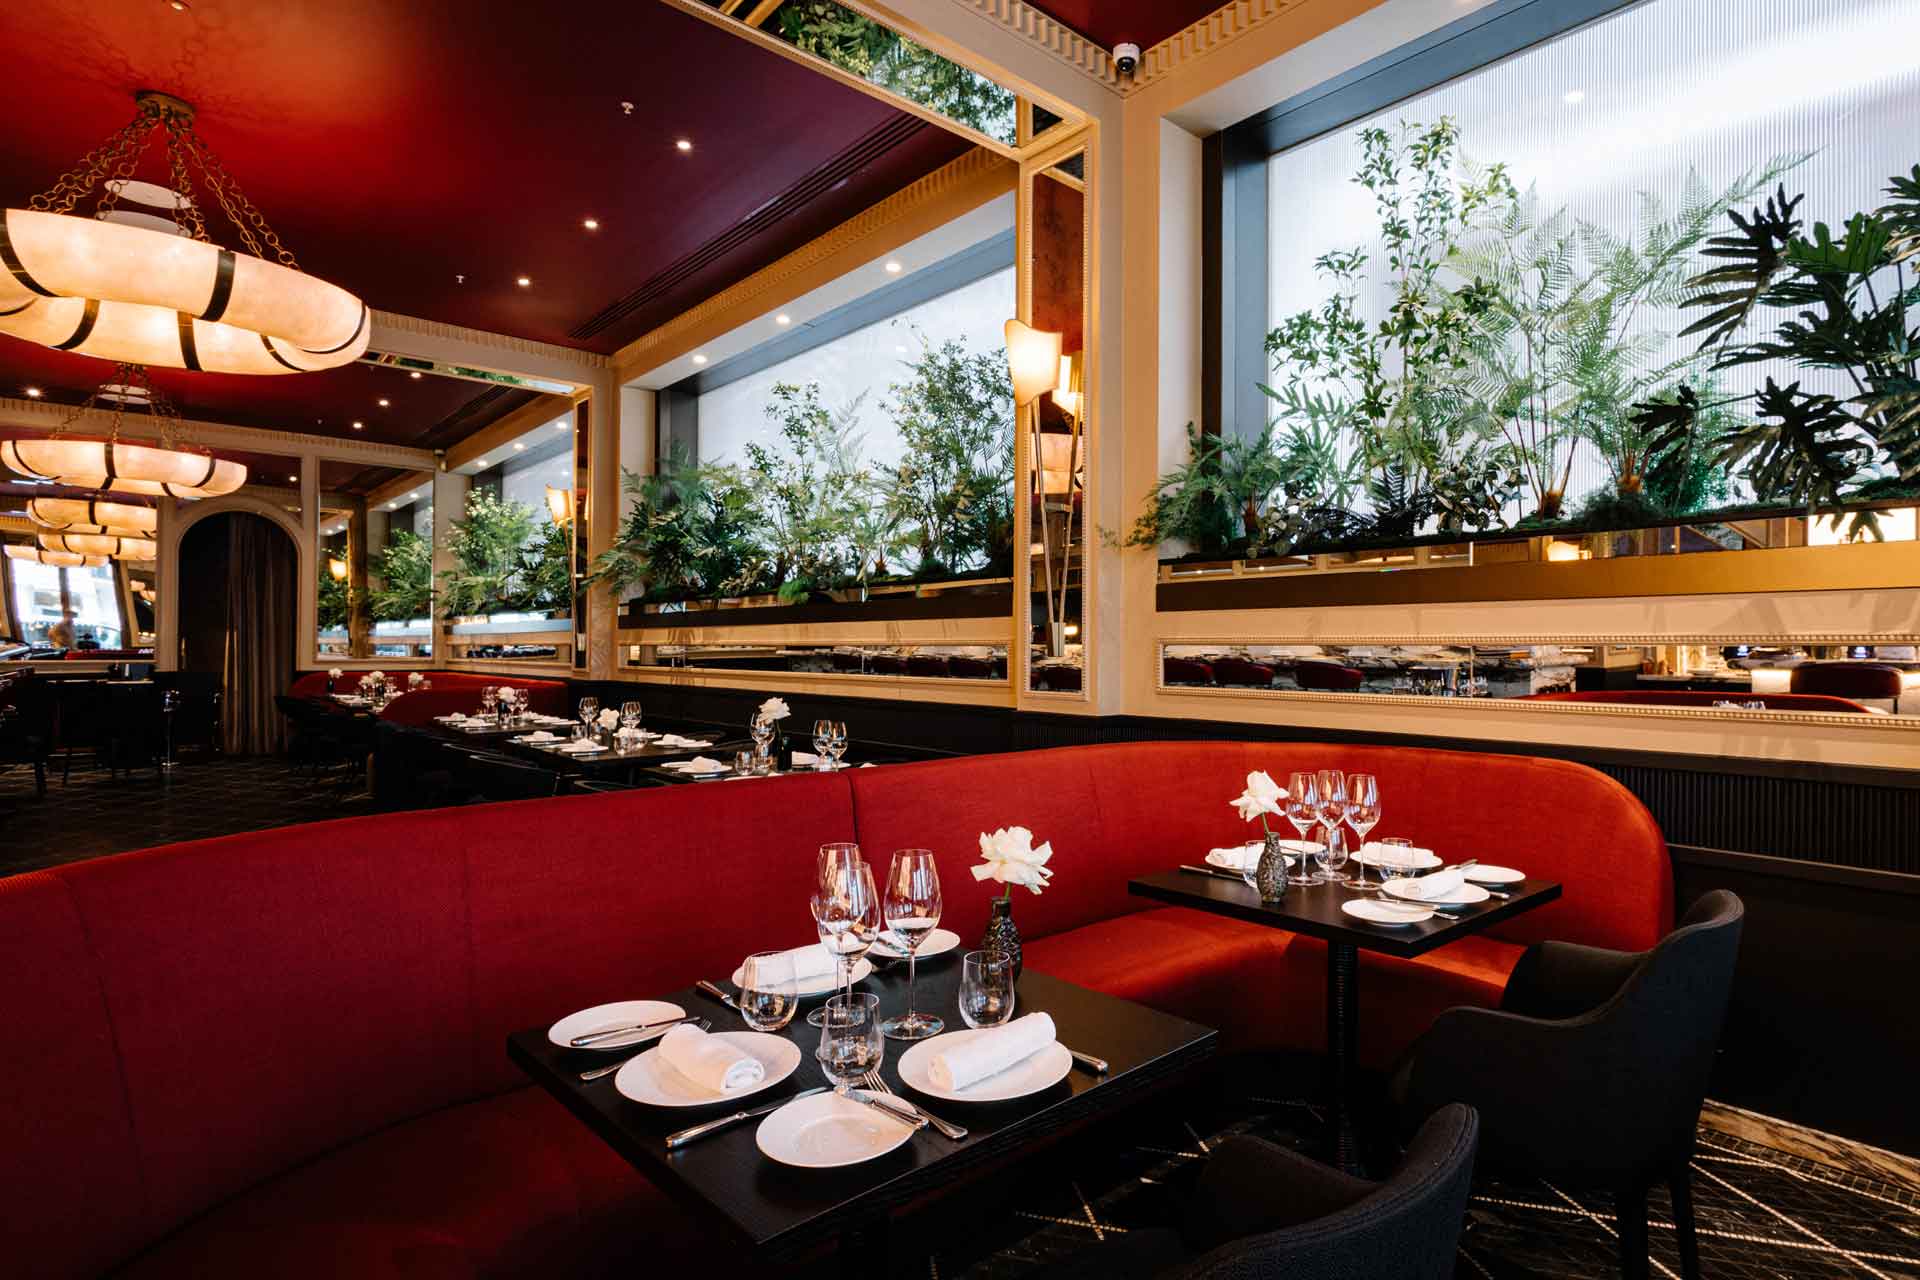 Restaurant with red plush seating, red ceilings and marble pendant lights